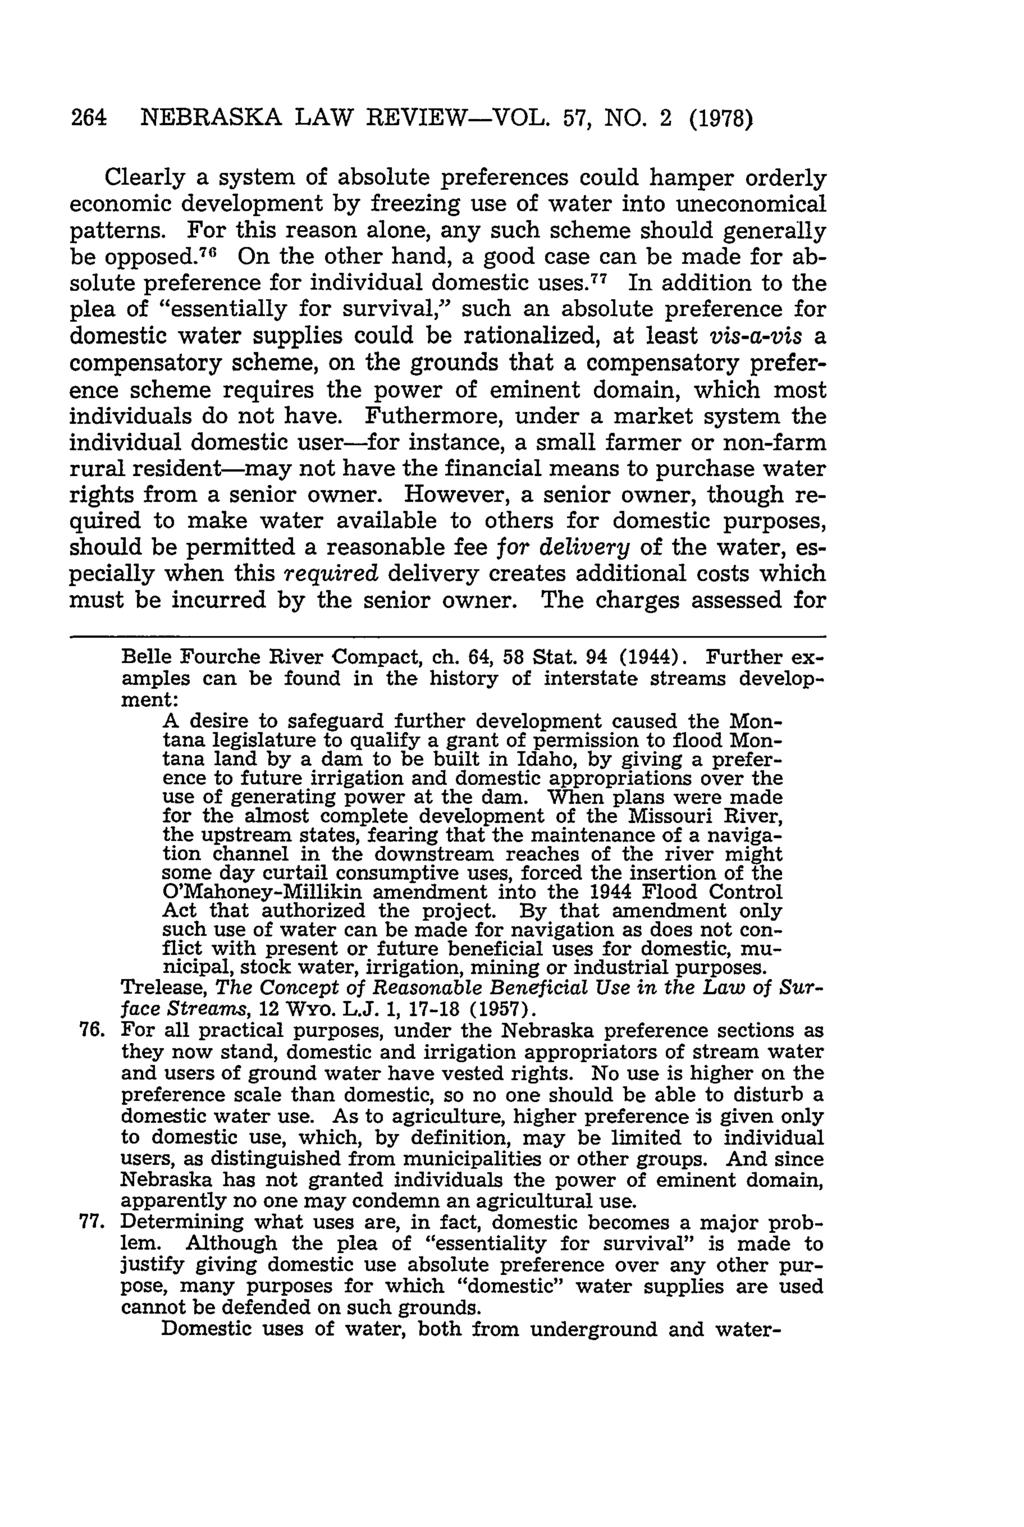 264 NEBRASKA LAW REVIEW-VOL. 57, NO. 2 (1978) Clearly a system of absolute preferences could hamper orderly economic development by freezing use of water into uneconomical patterns.